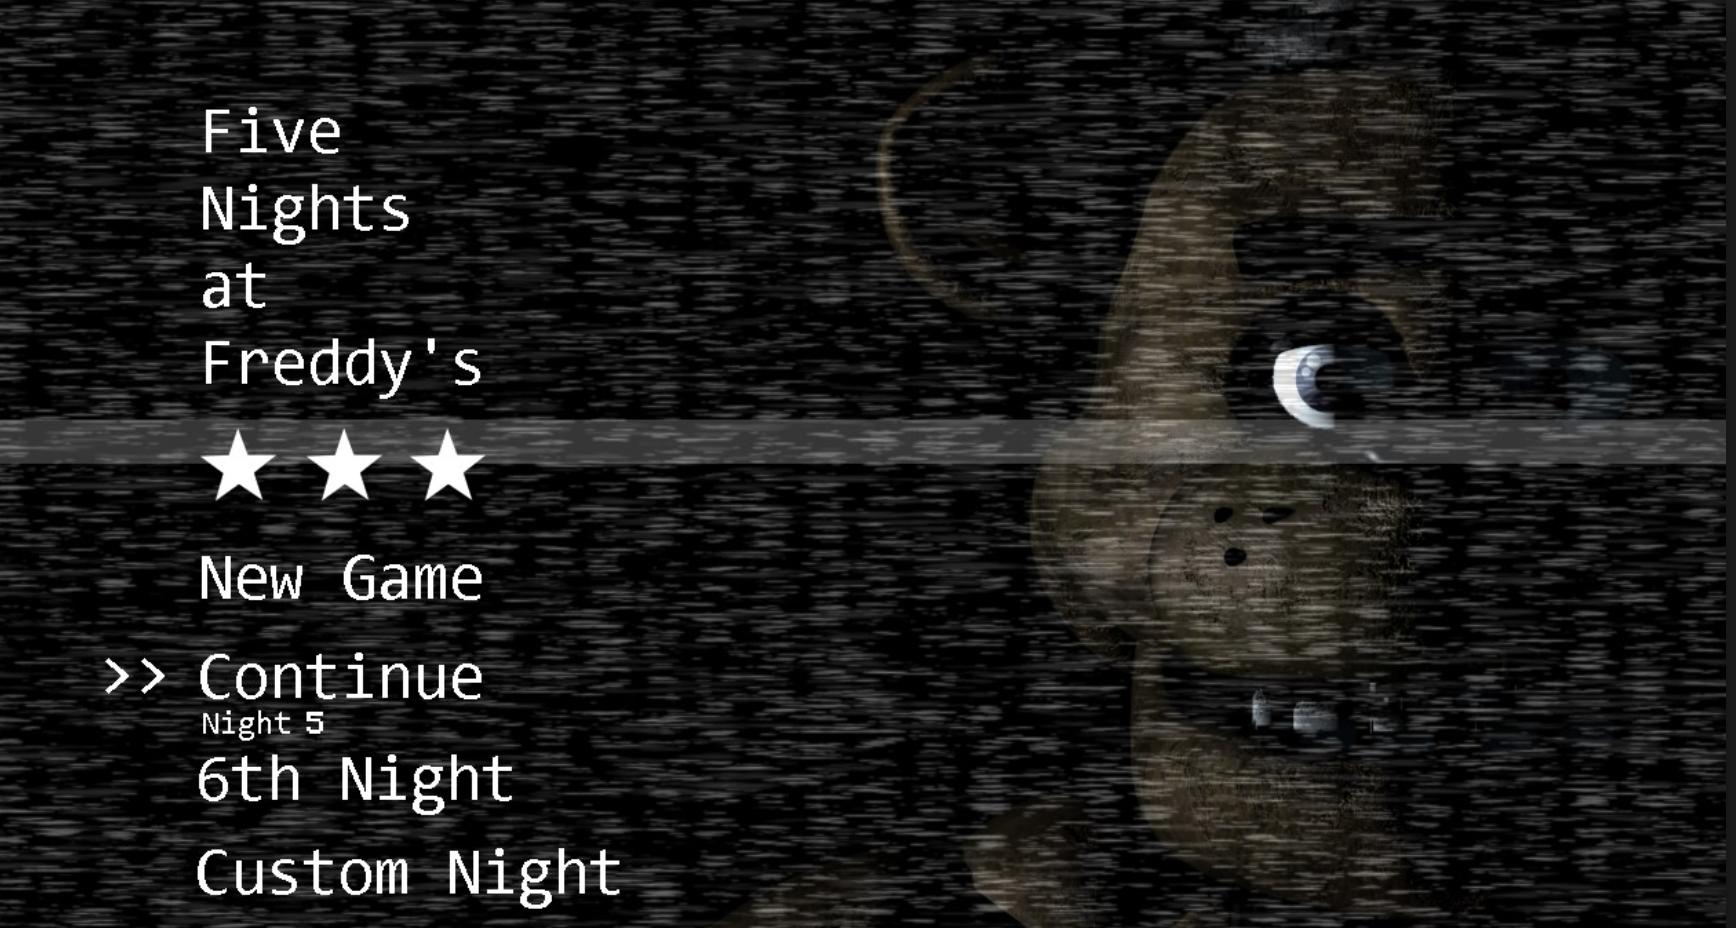 Fnaf 2 Five Nights At Freddy For Android Apk Download - fnaf 2 five nights at freddys 2 roblox edition video